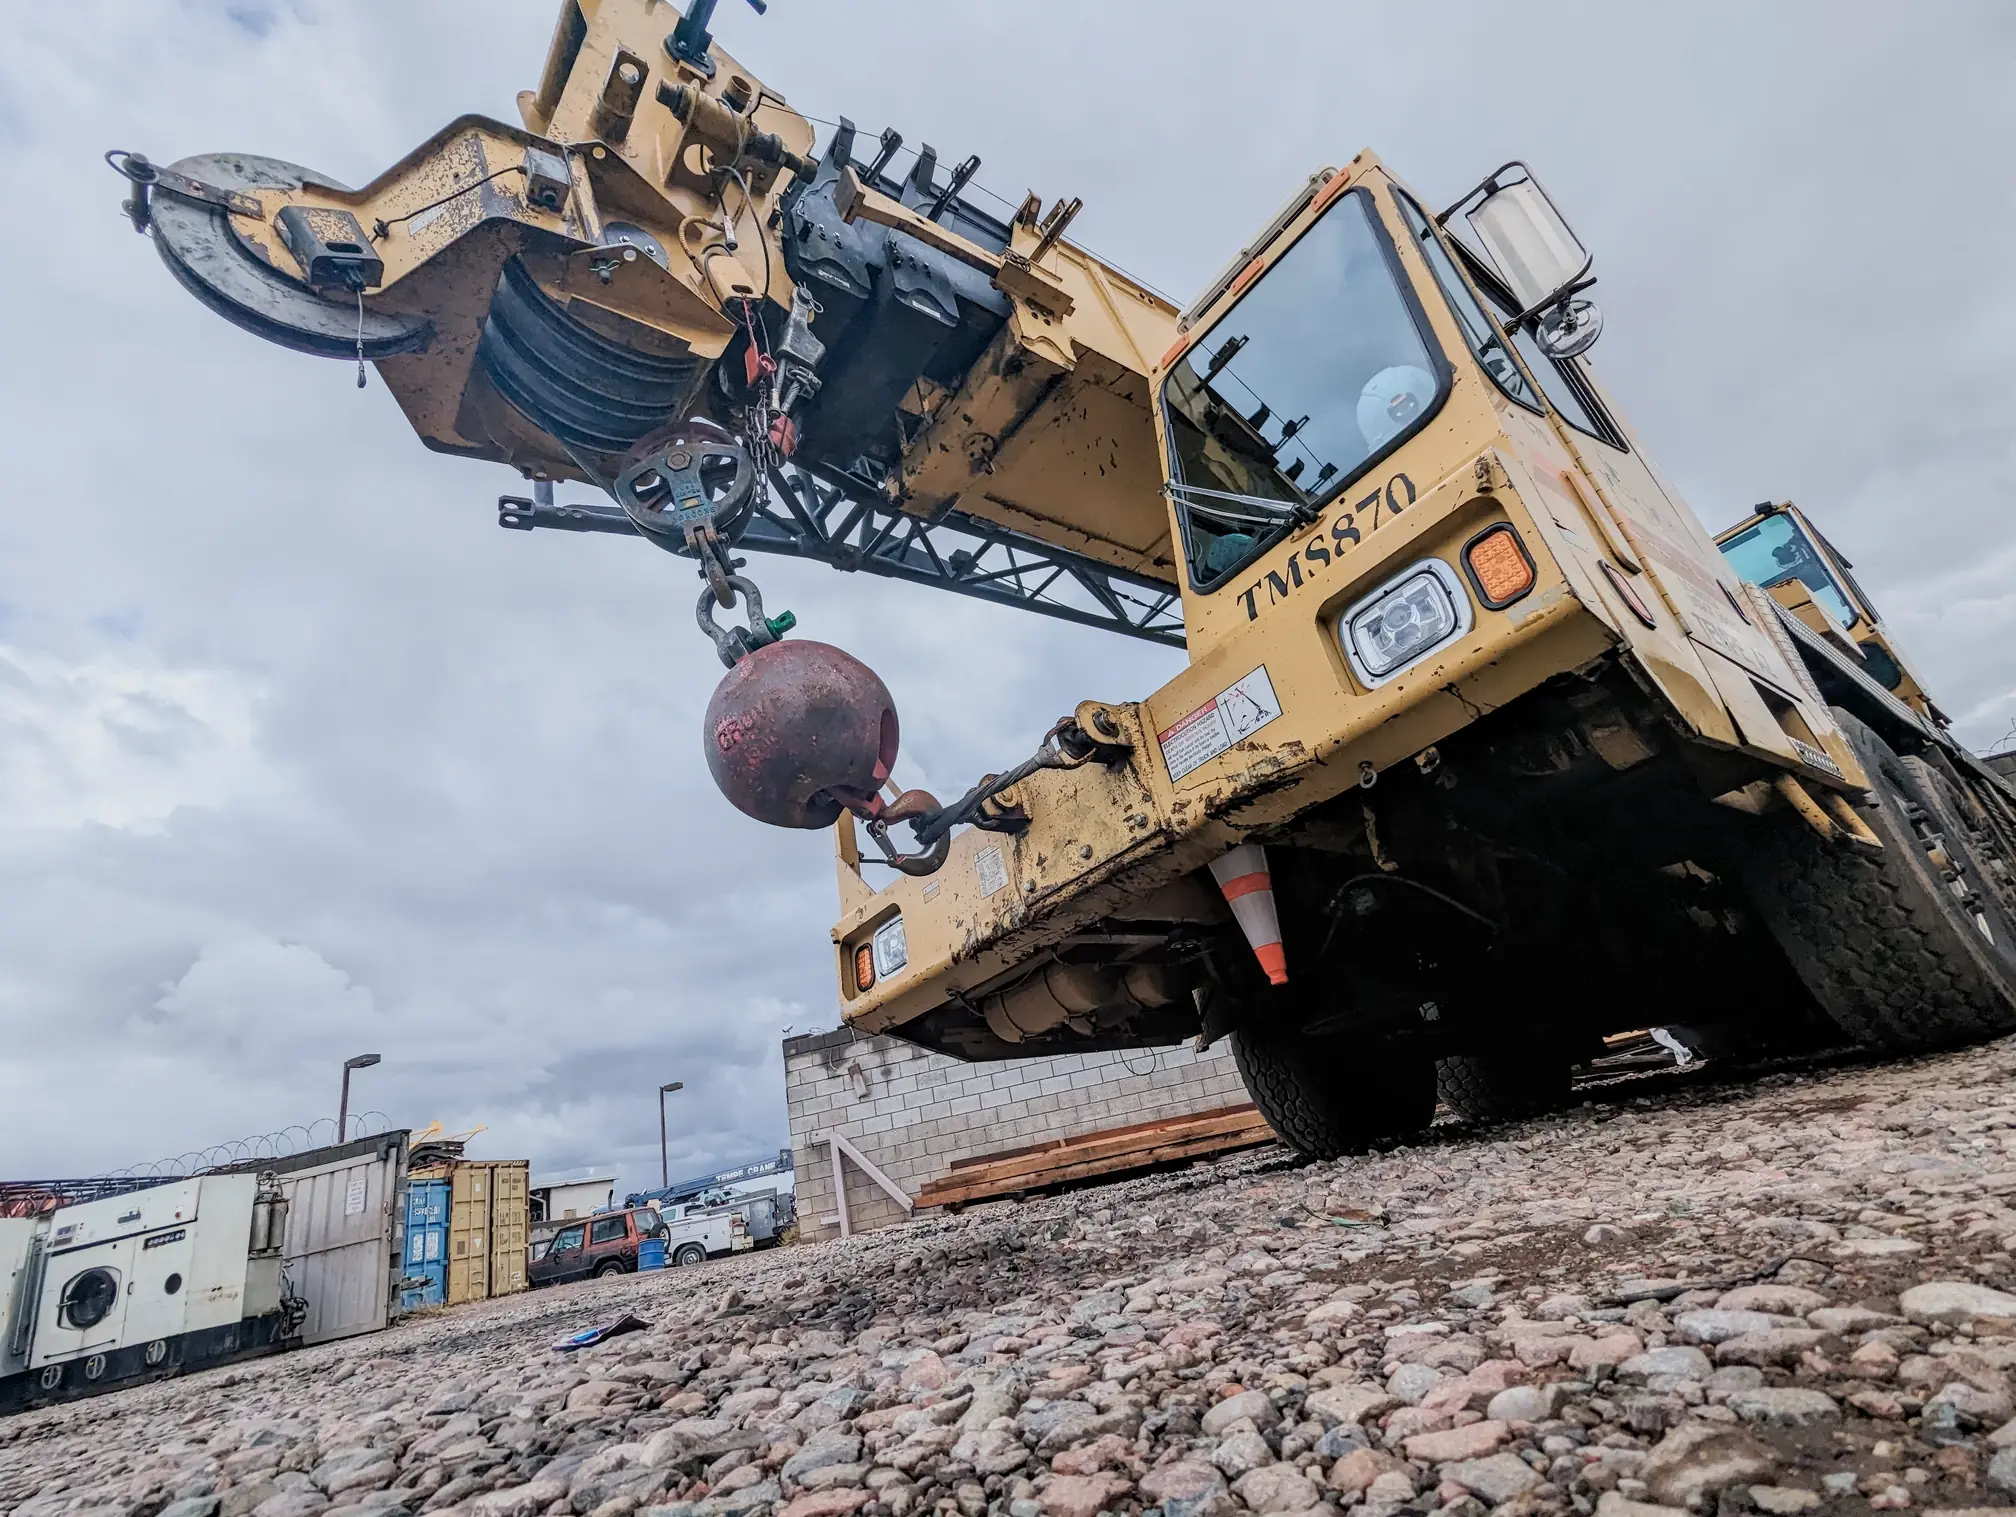 Grove TMS870 displayed in its full stature, showcasing its heavy-duty lifting capacity.